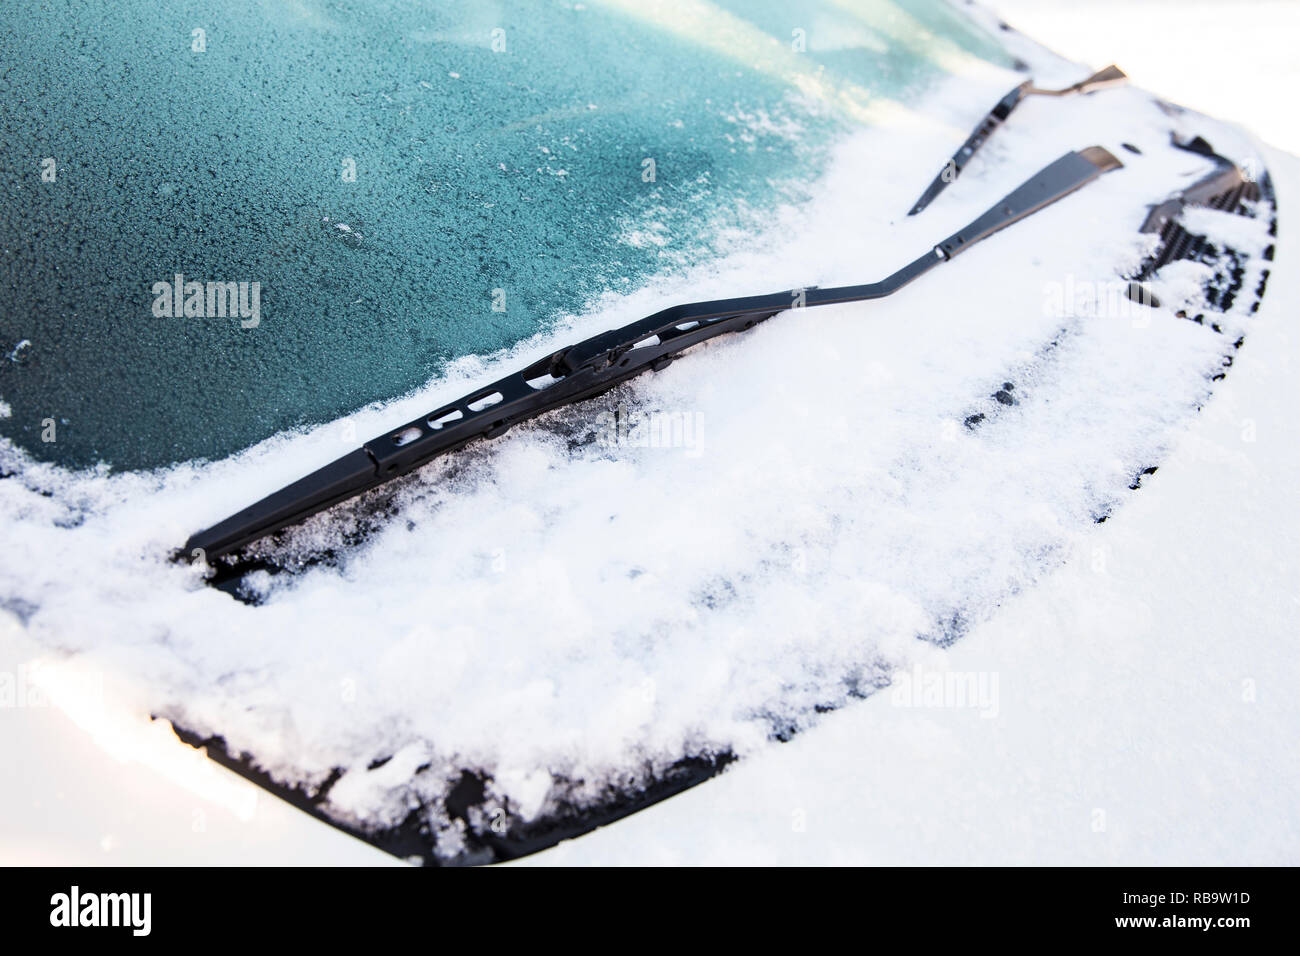 20 Spray To Defrost Windshield Images, Stock Photos, 3D objects